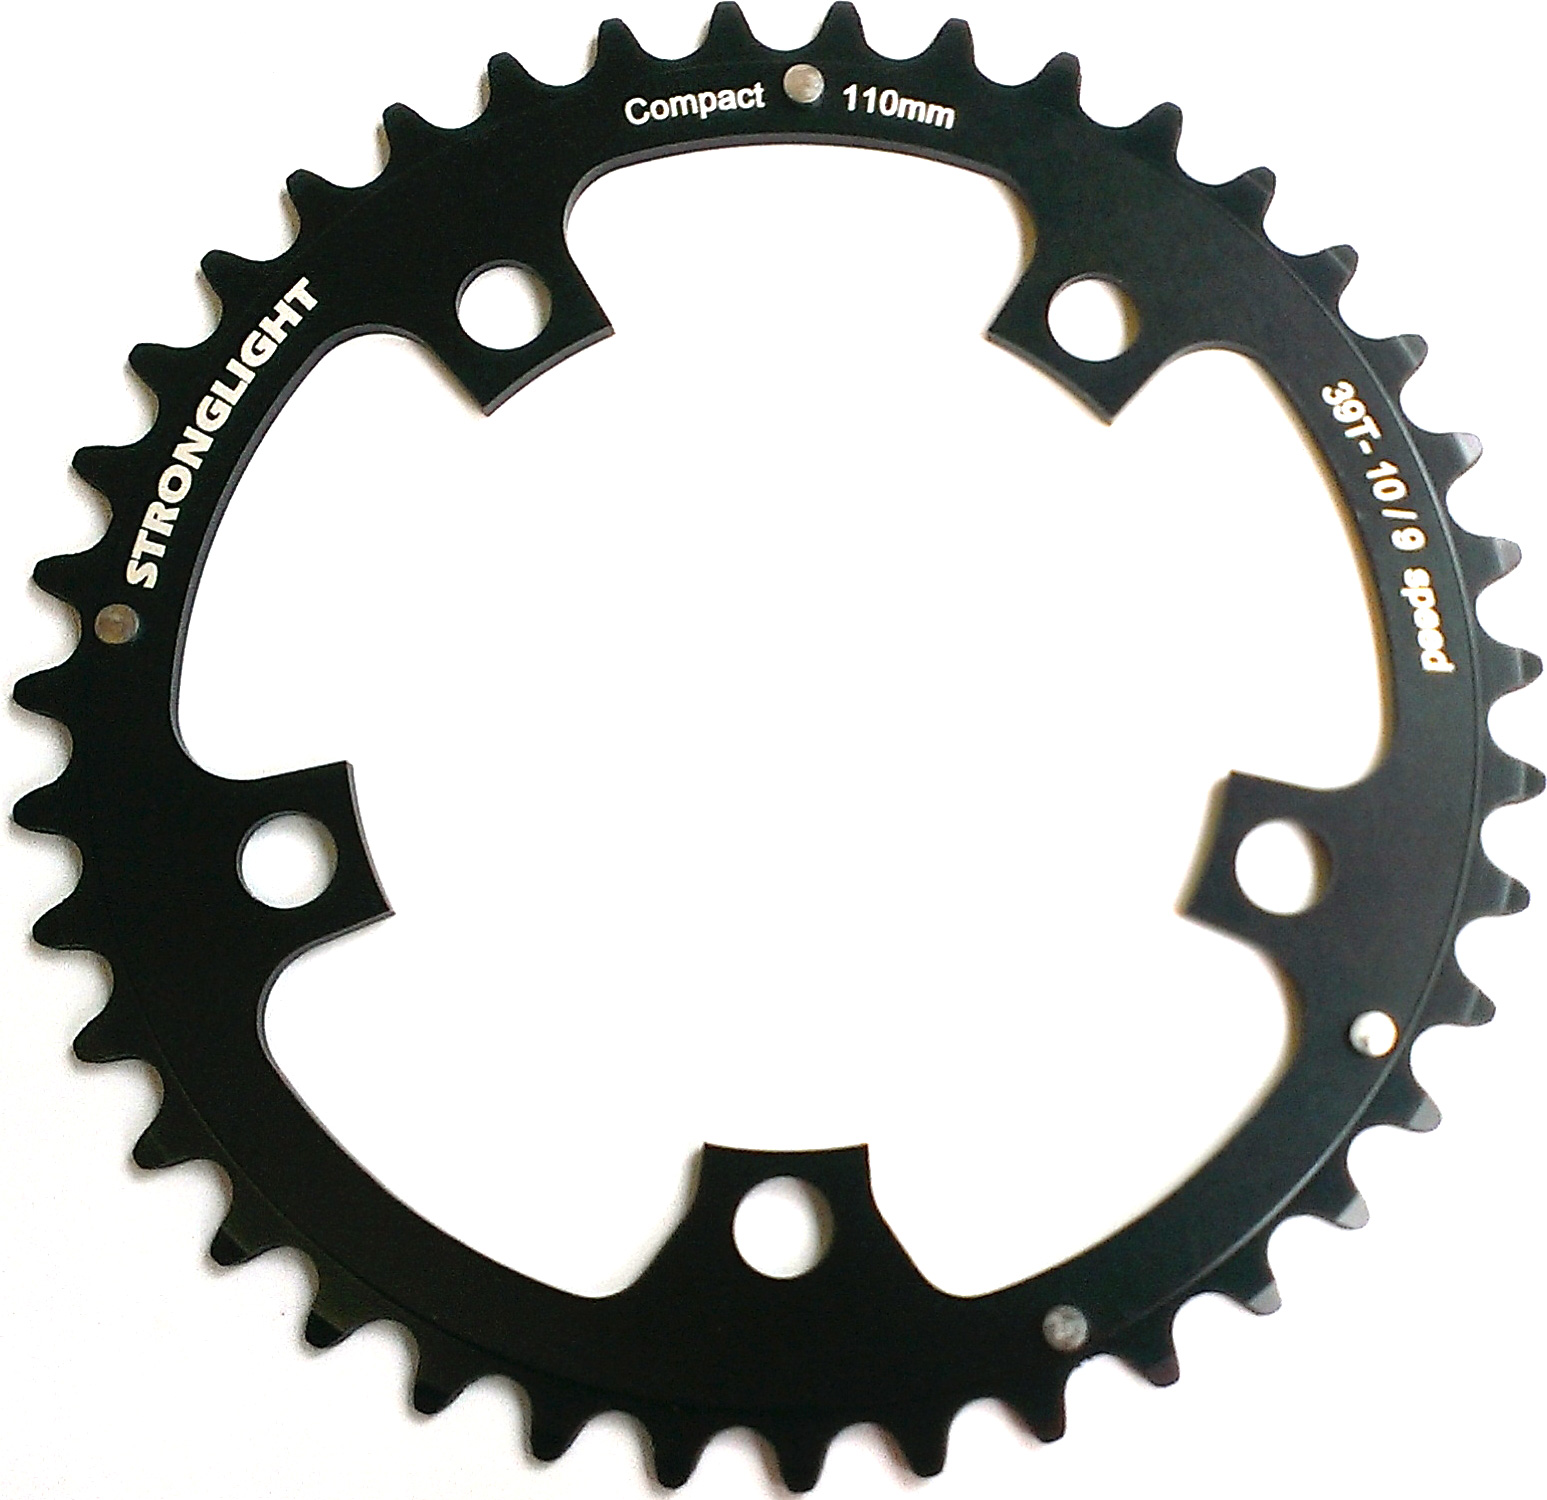 RD11039Z Stronglight 39T Black 5-Arm/110mm Chainring